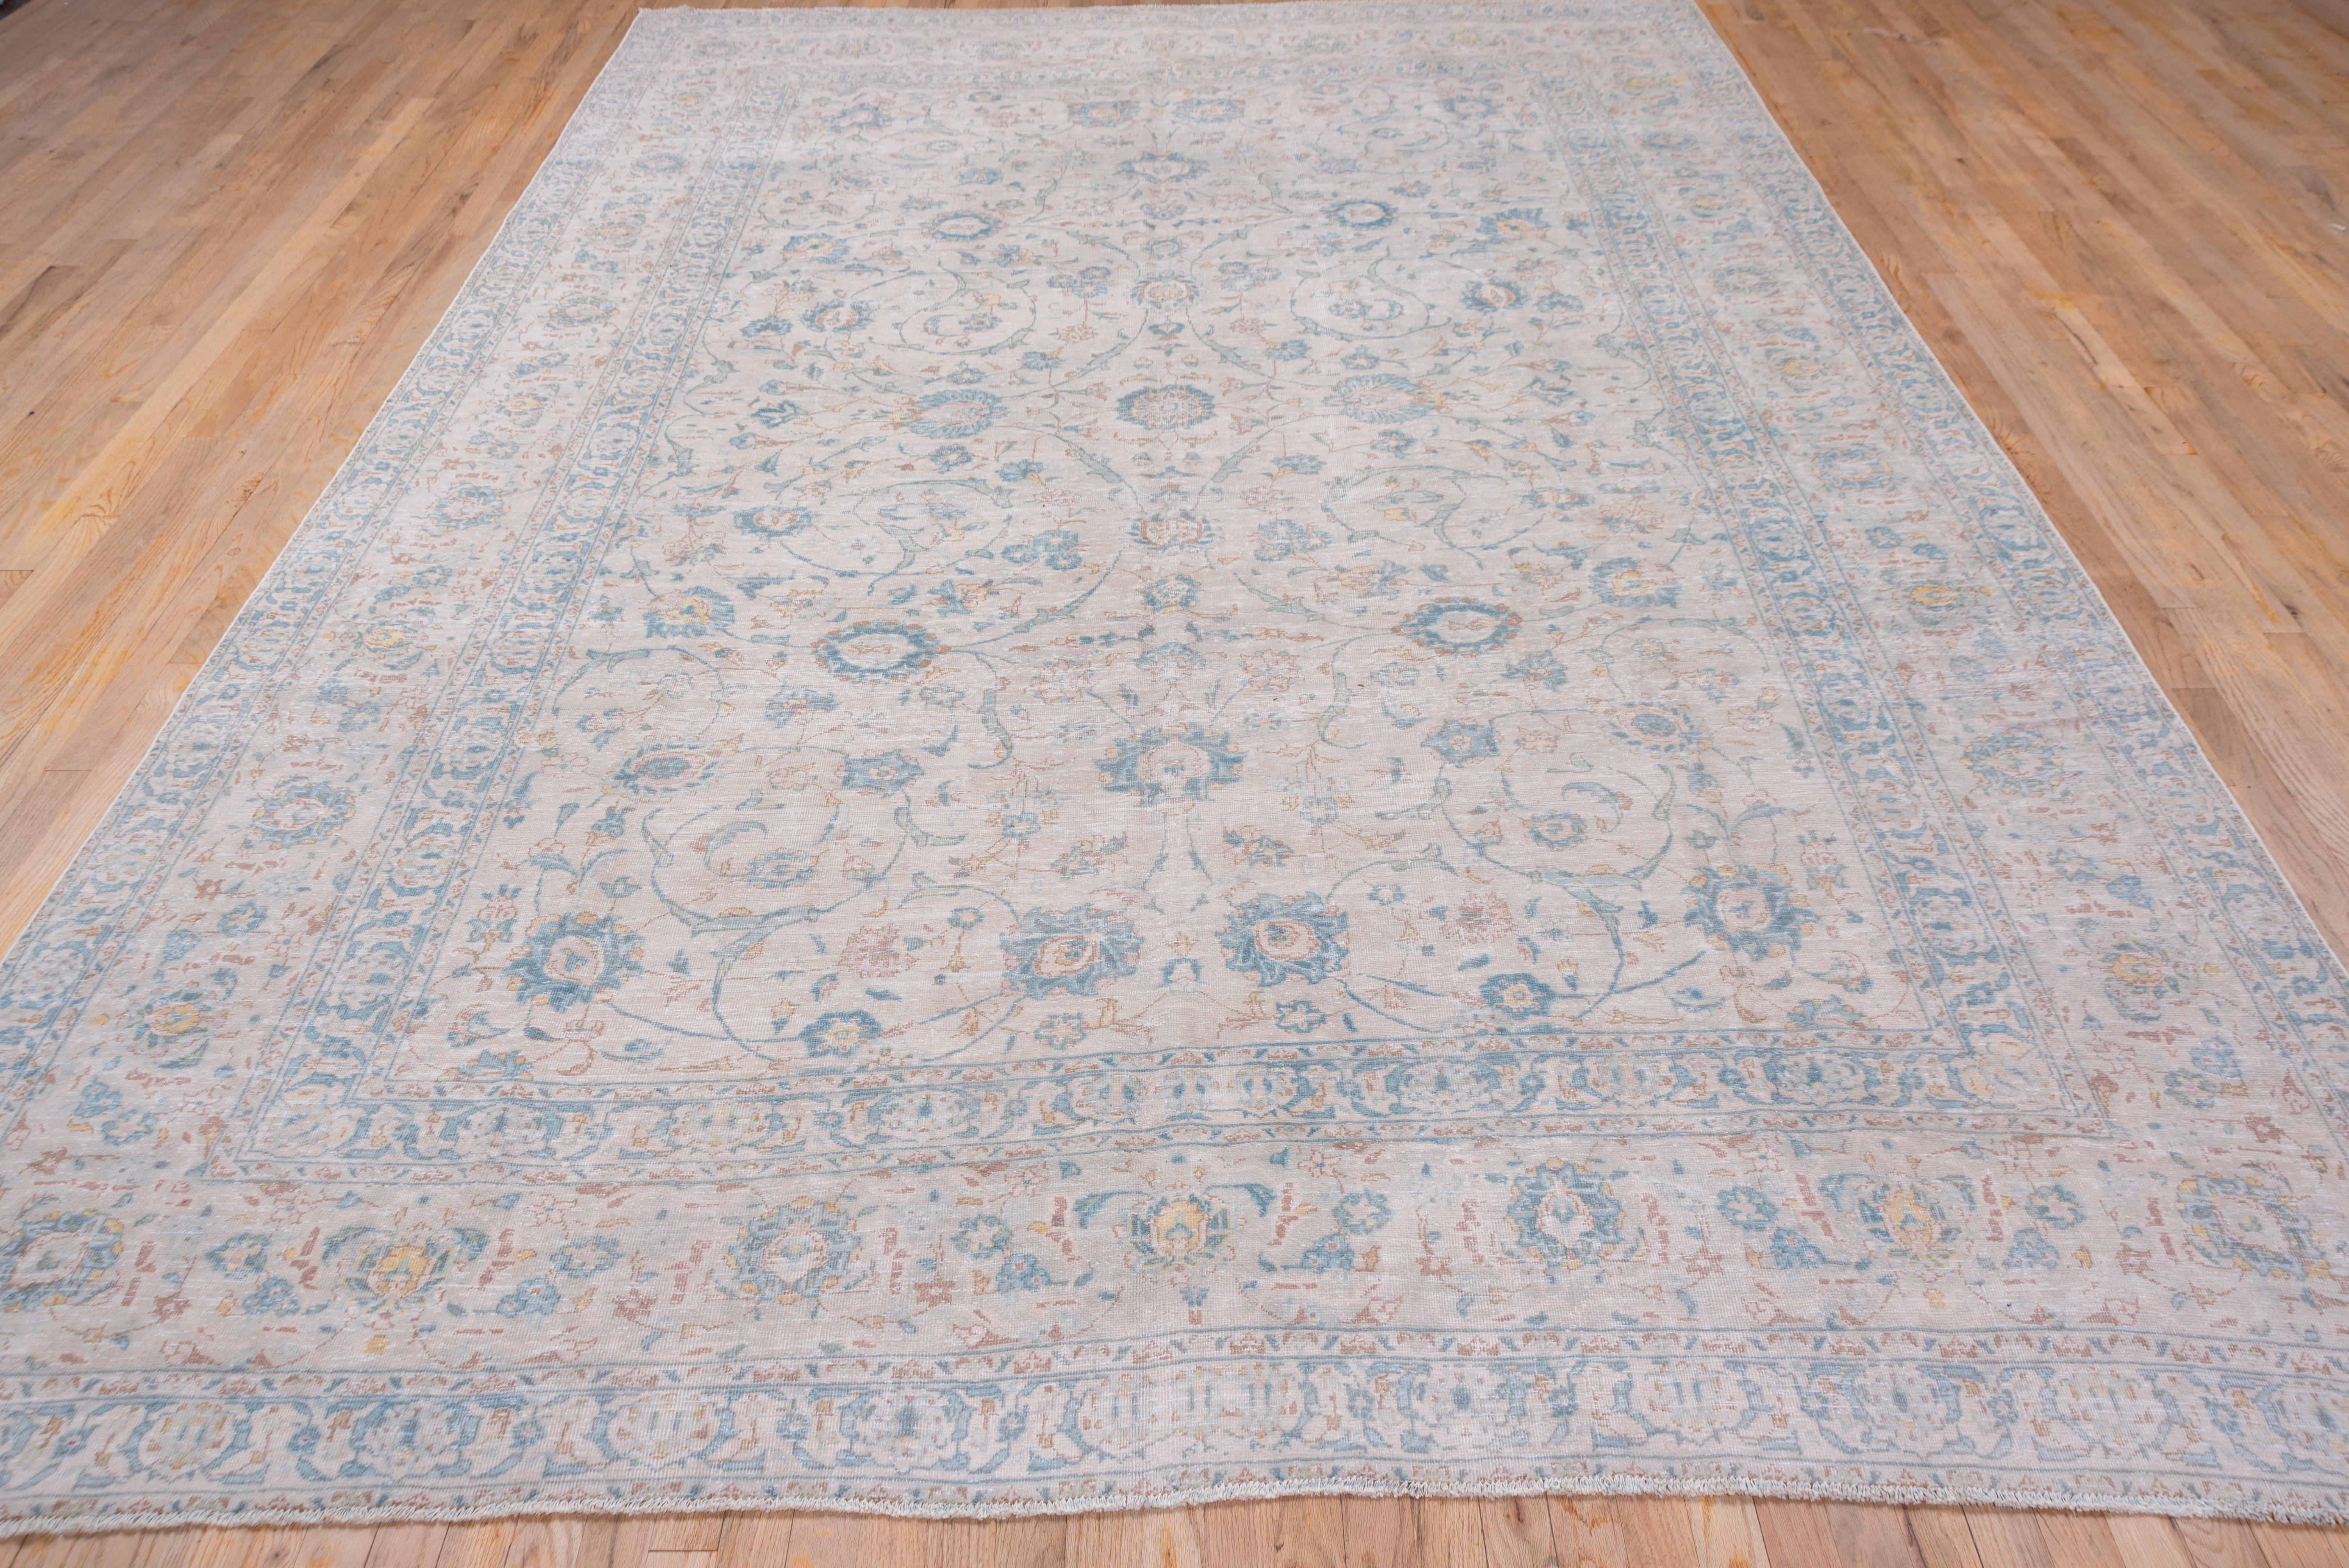 In a light cream and blue-grey/teal tonality, this NW Persian city carpet features a slender spiraling vine pattern with palmette anchors, within a tonally en suite border system including a spacious palmette and vine major frame. The field